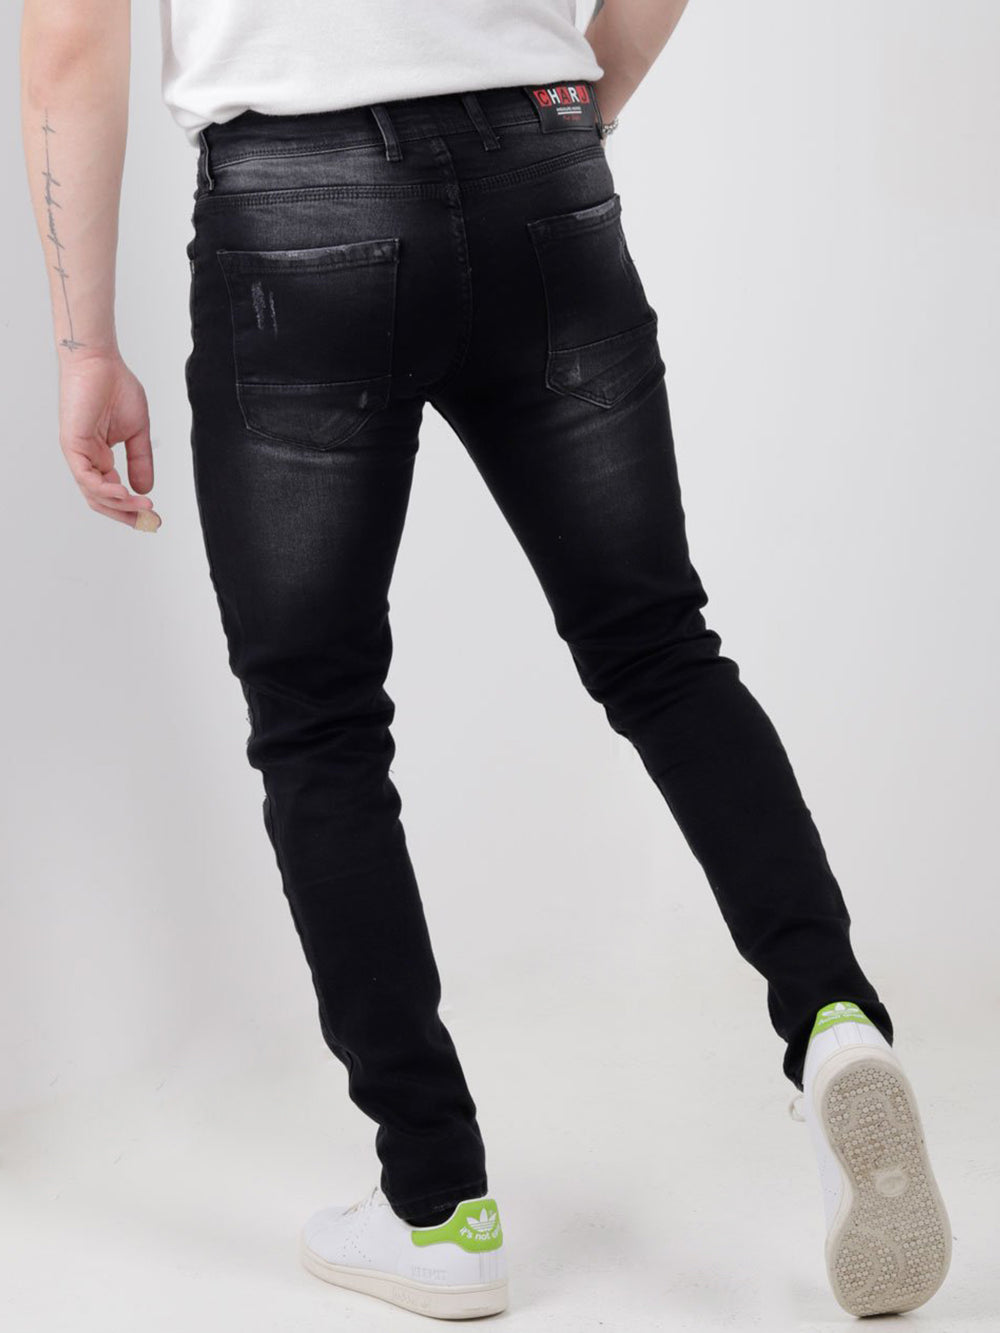 The back view of a man wearing MOONLISA jeans.